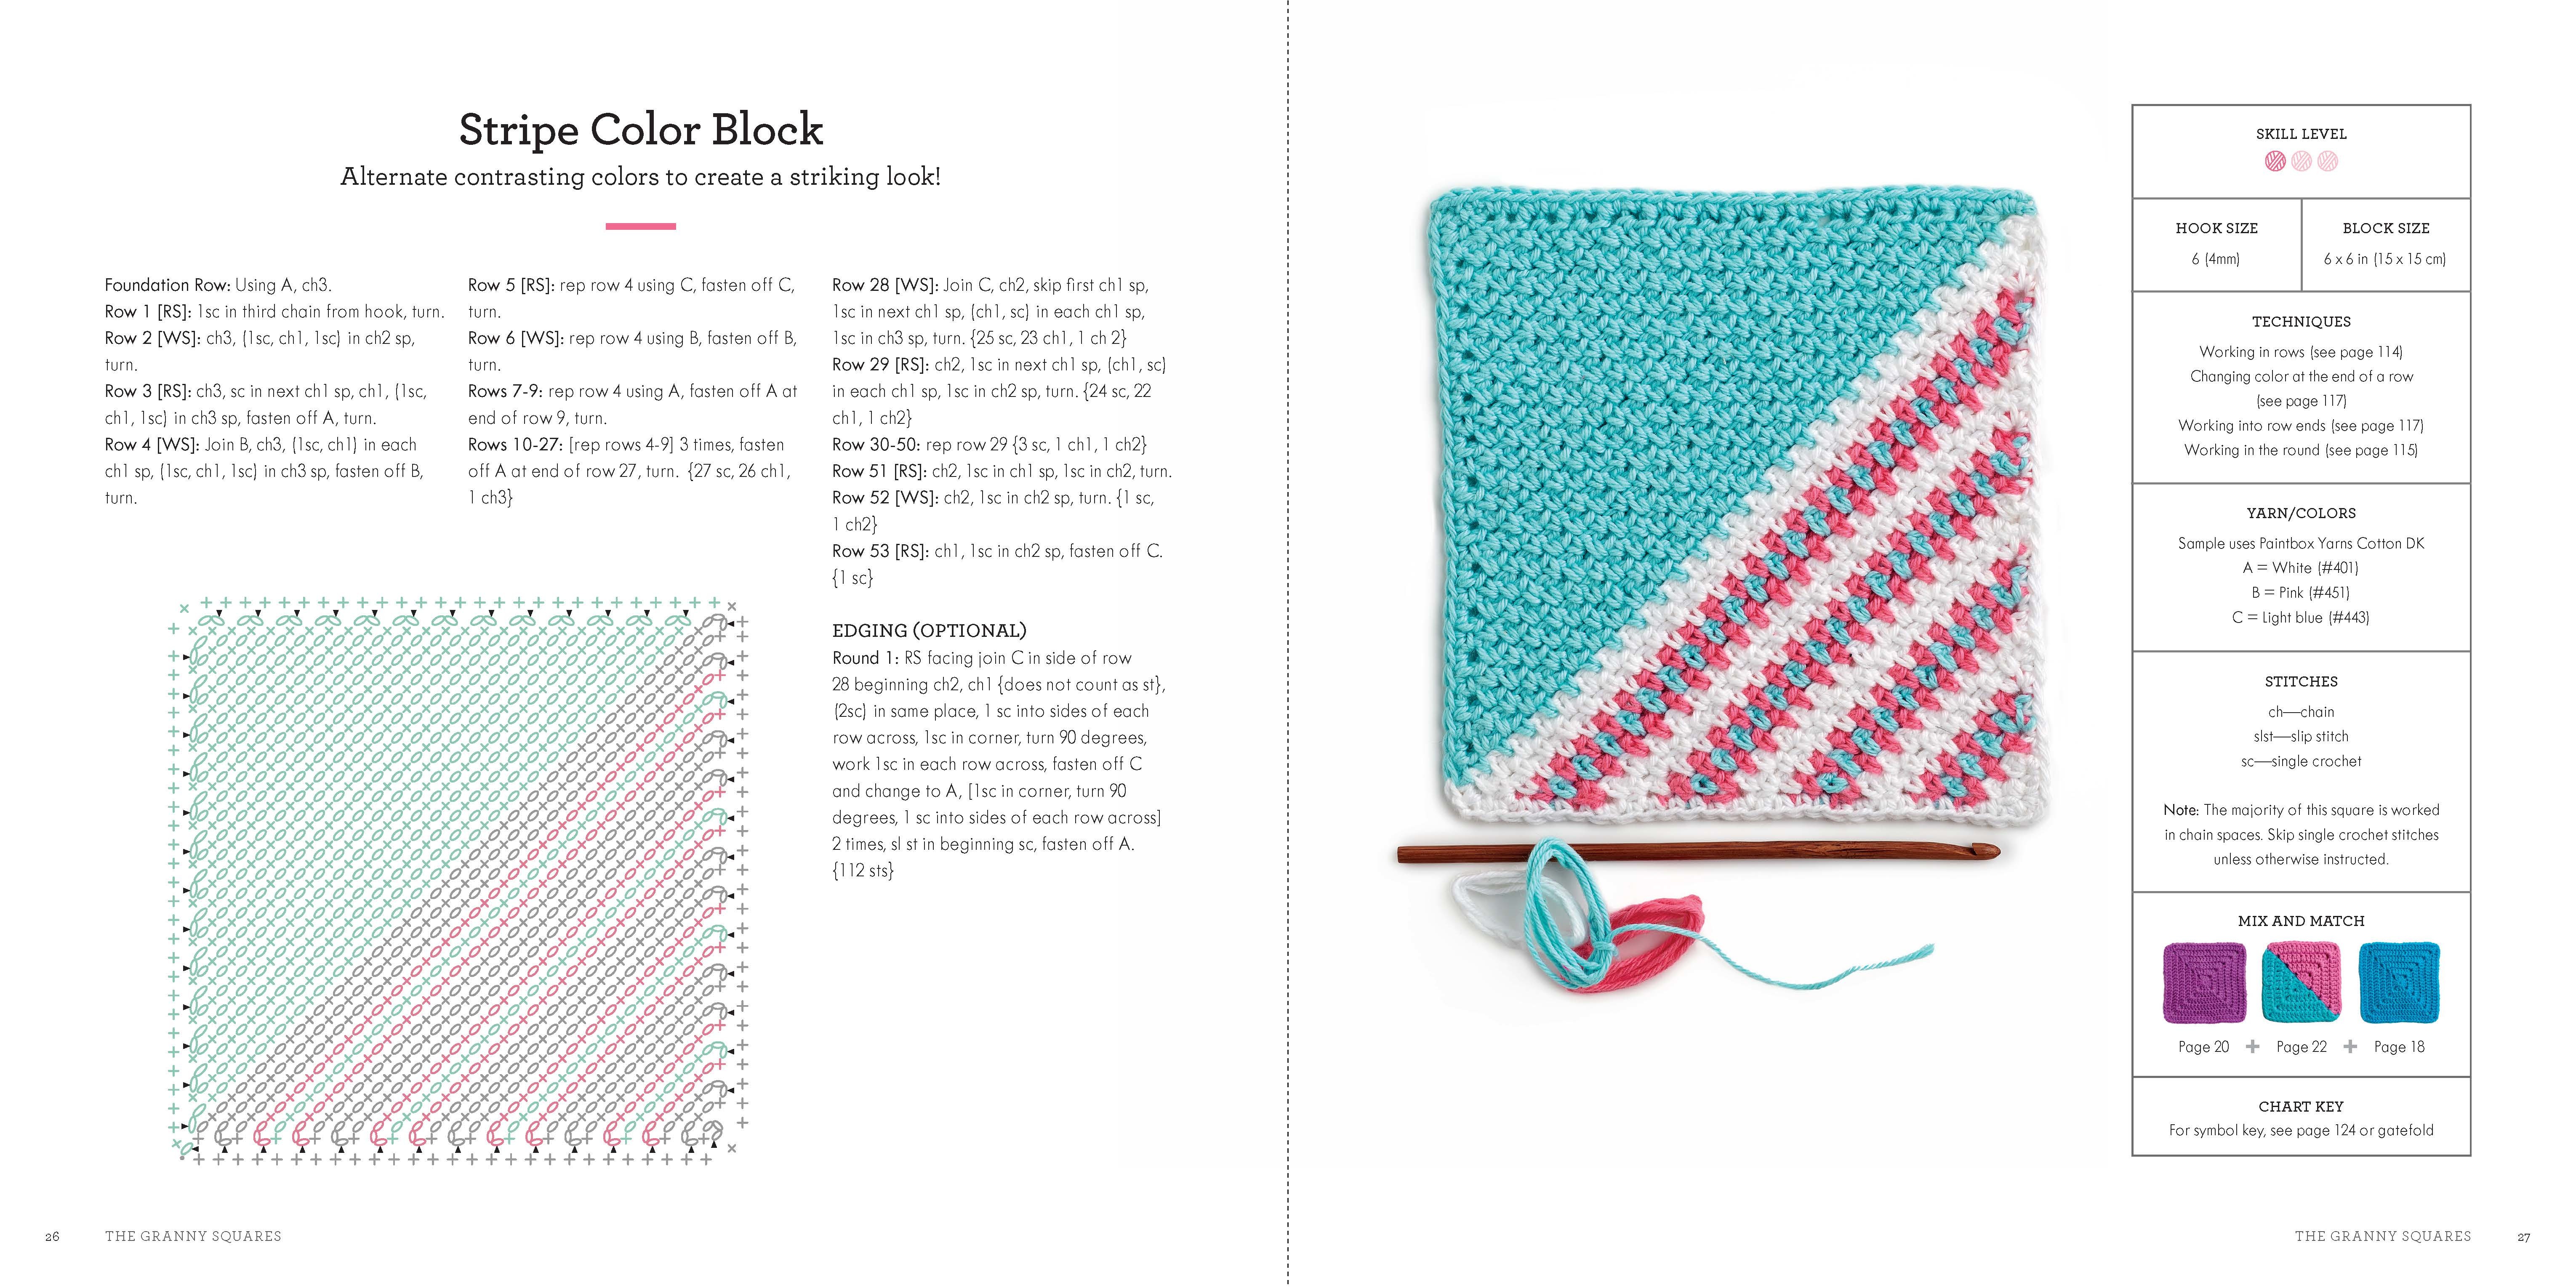 A Modern Guide to Granny Squares by Celine Semaan, Leonie Morgan:  9780593332016